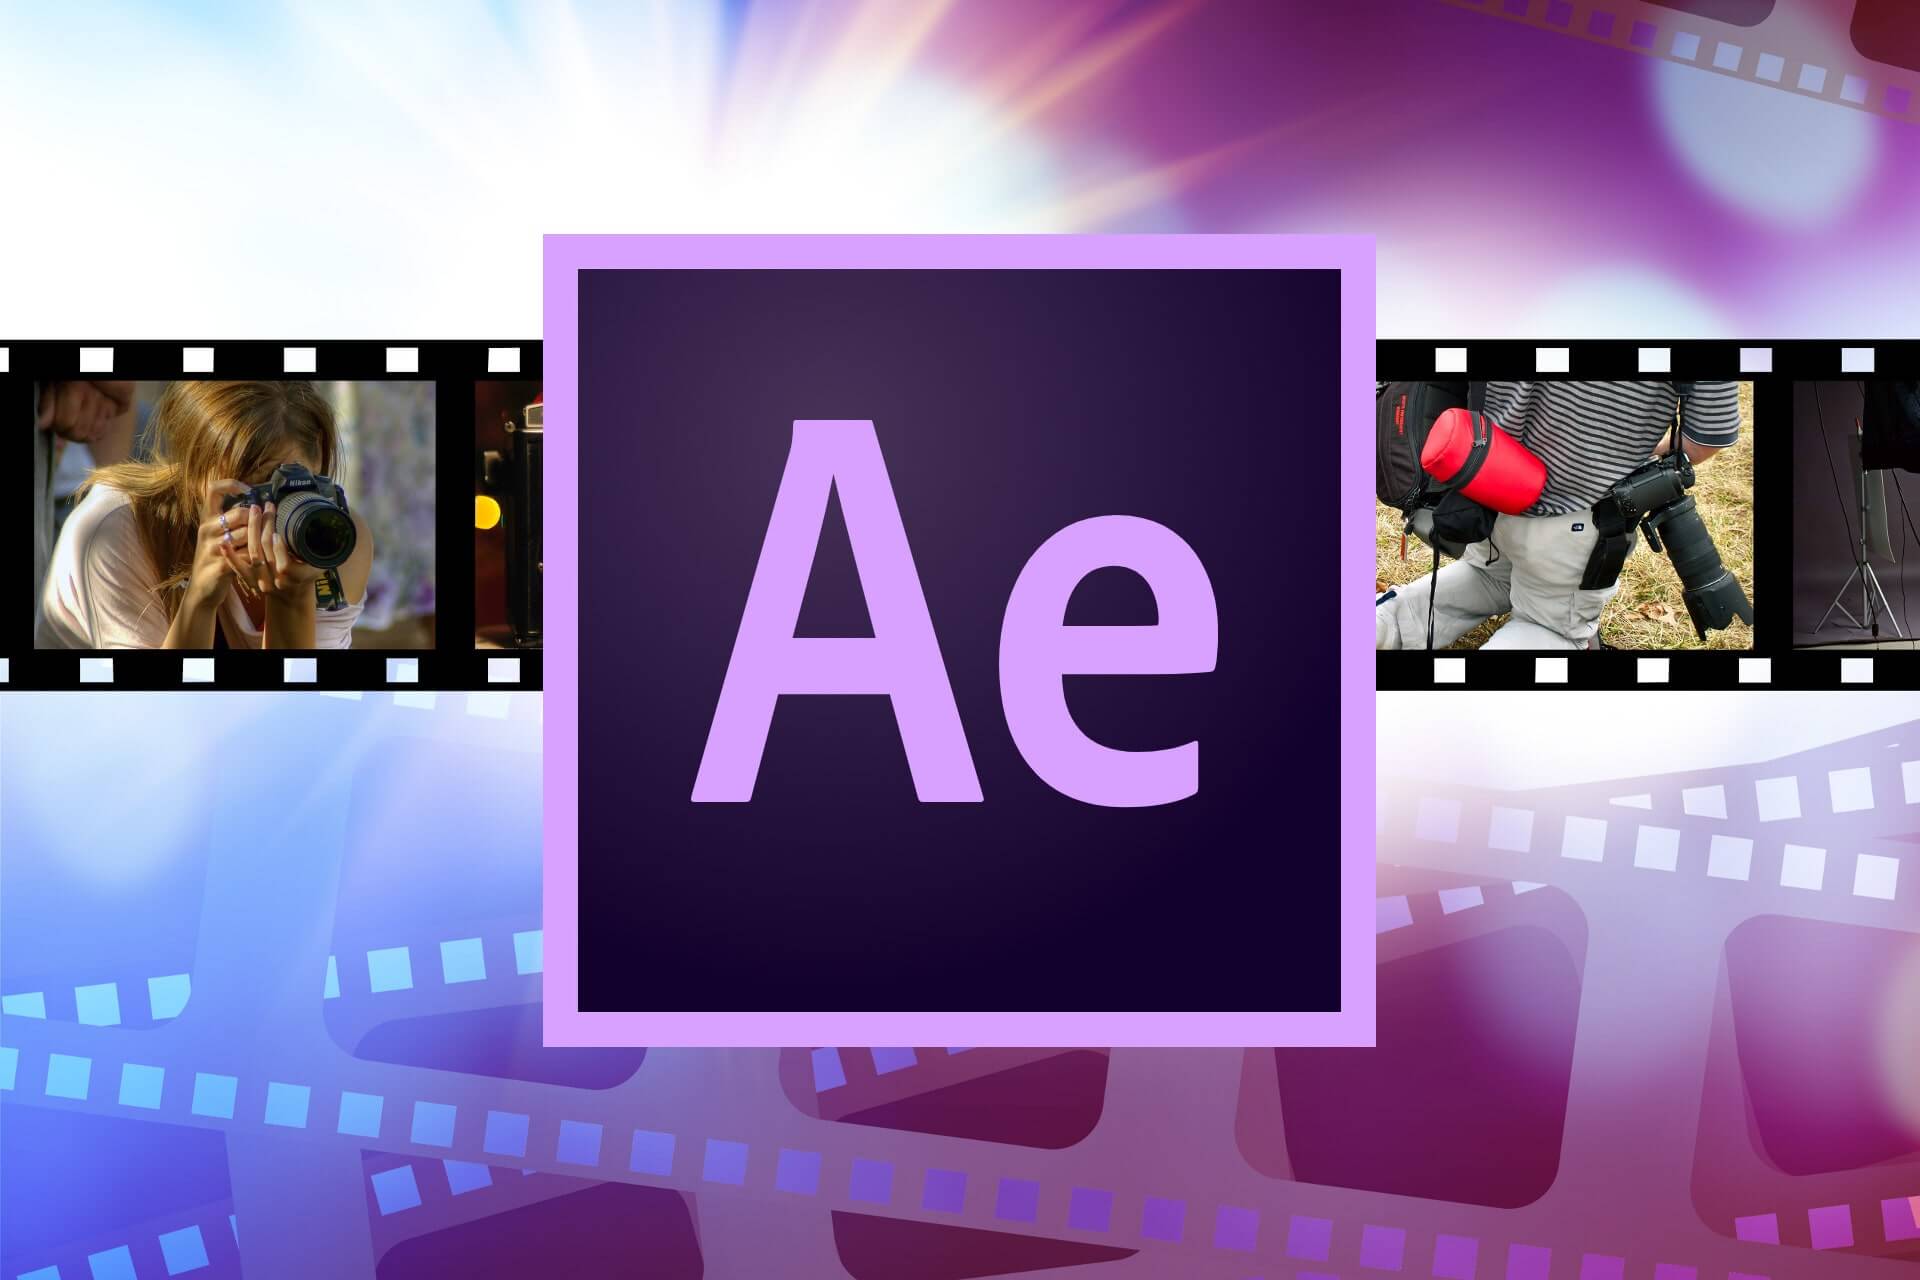 adobe after effects software download